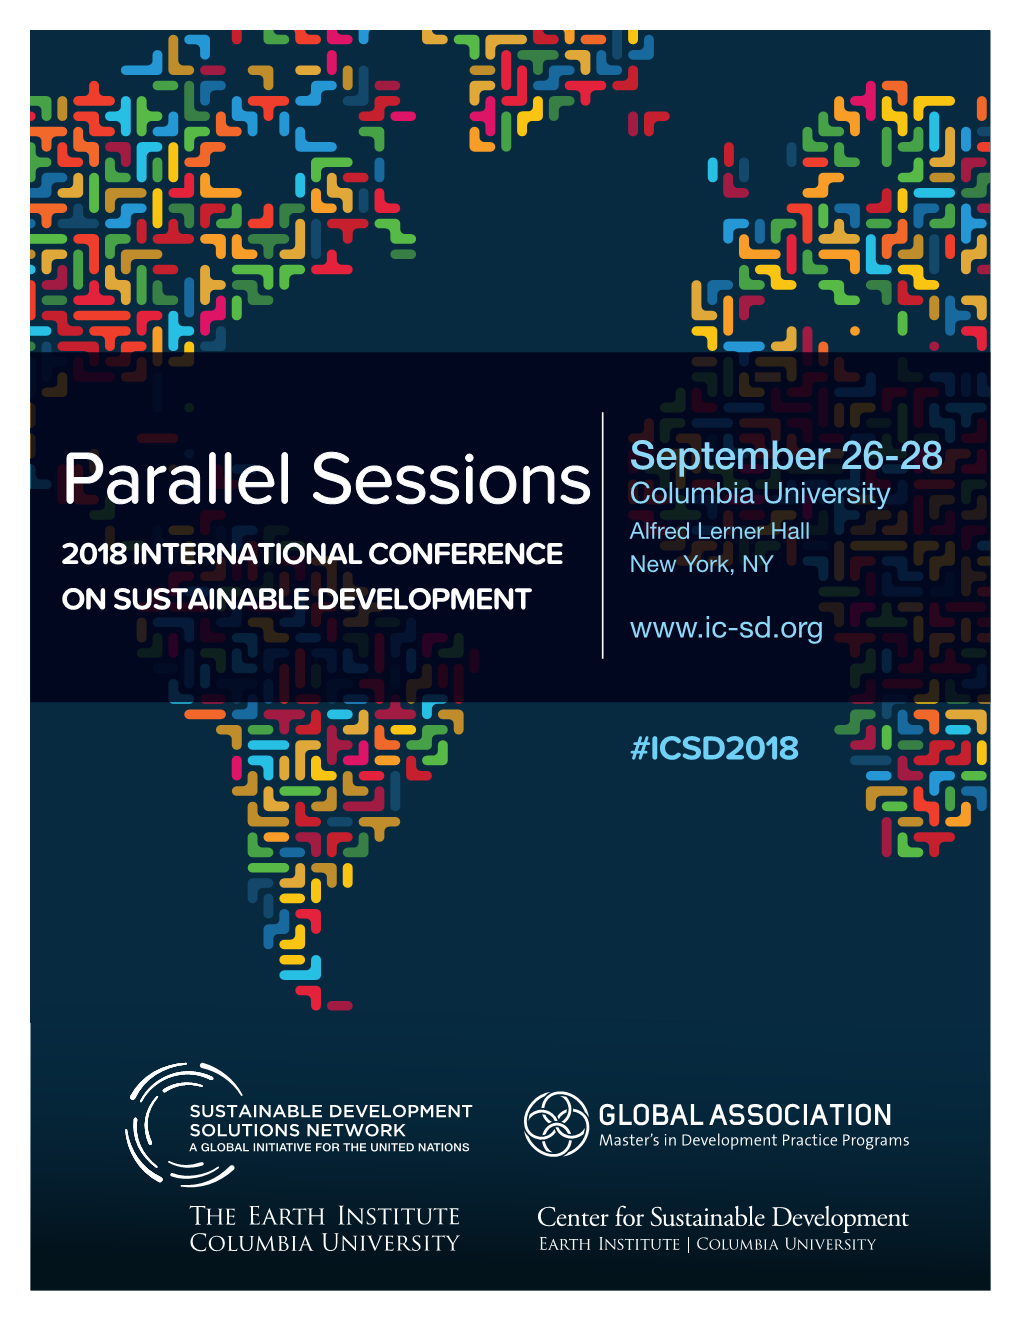 Final Program of the Parallel Sessions